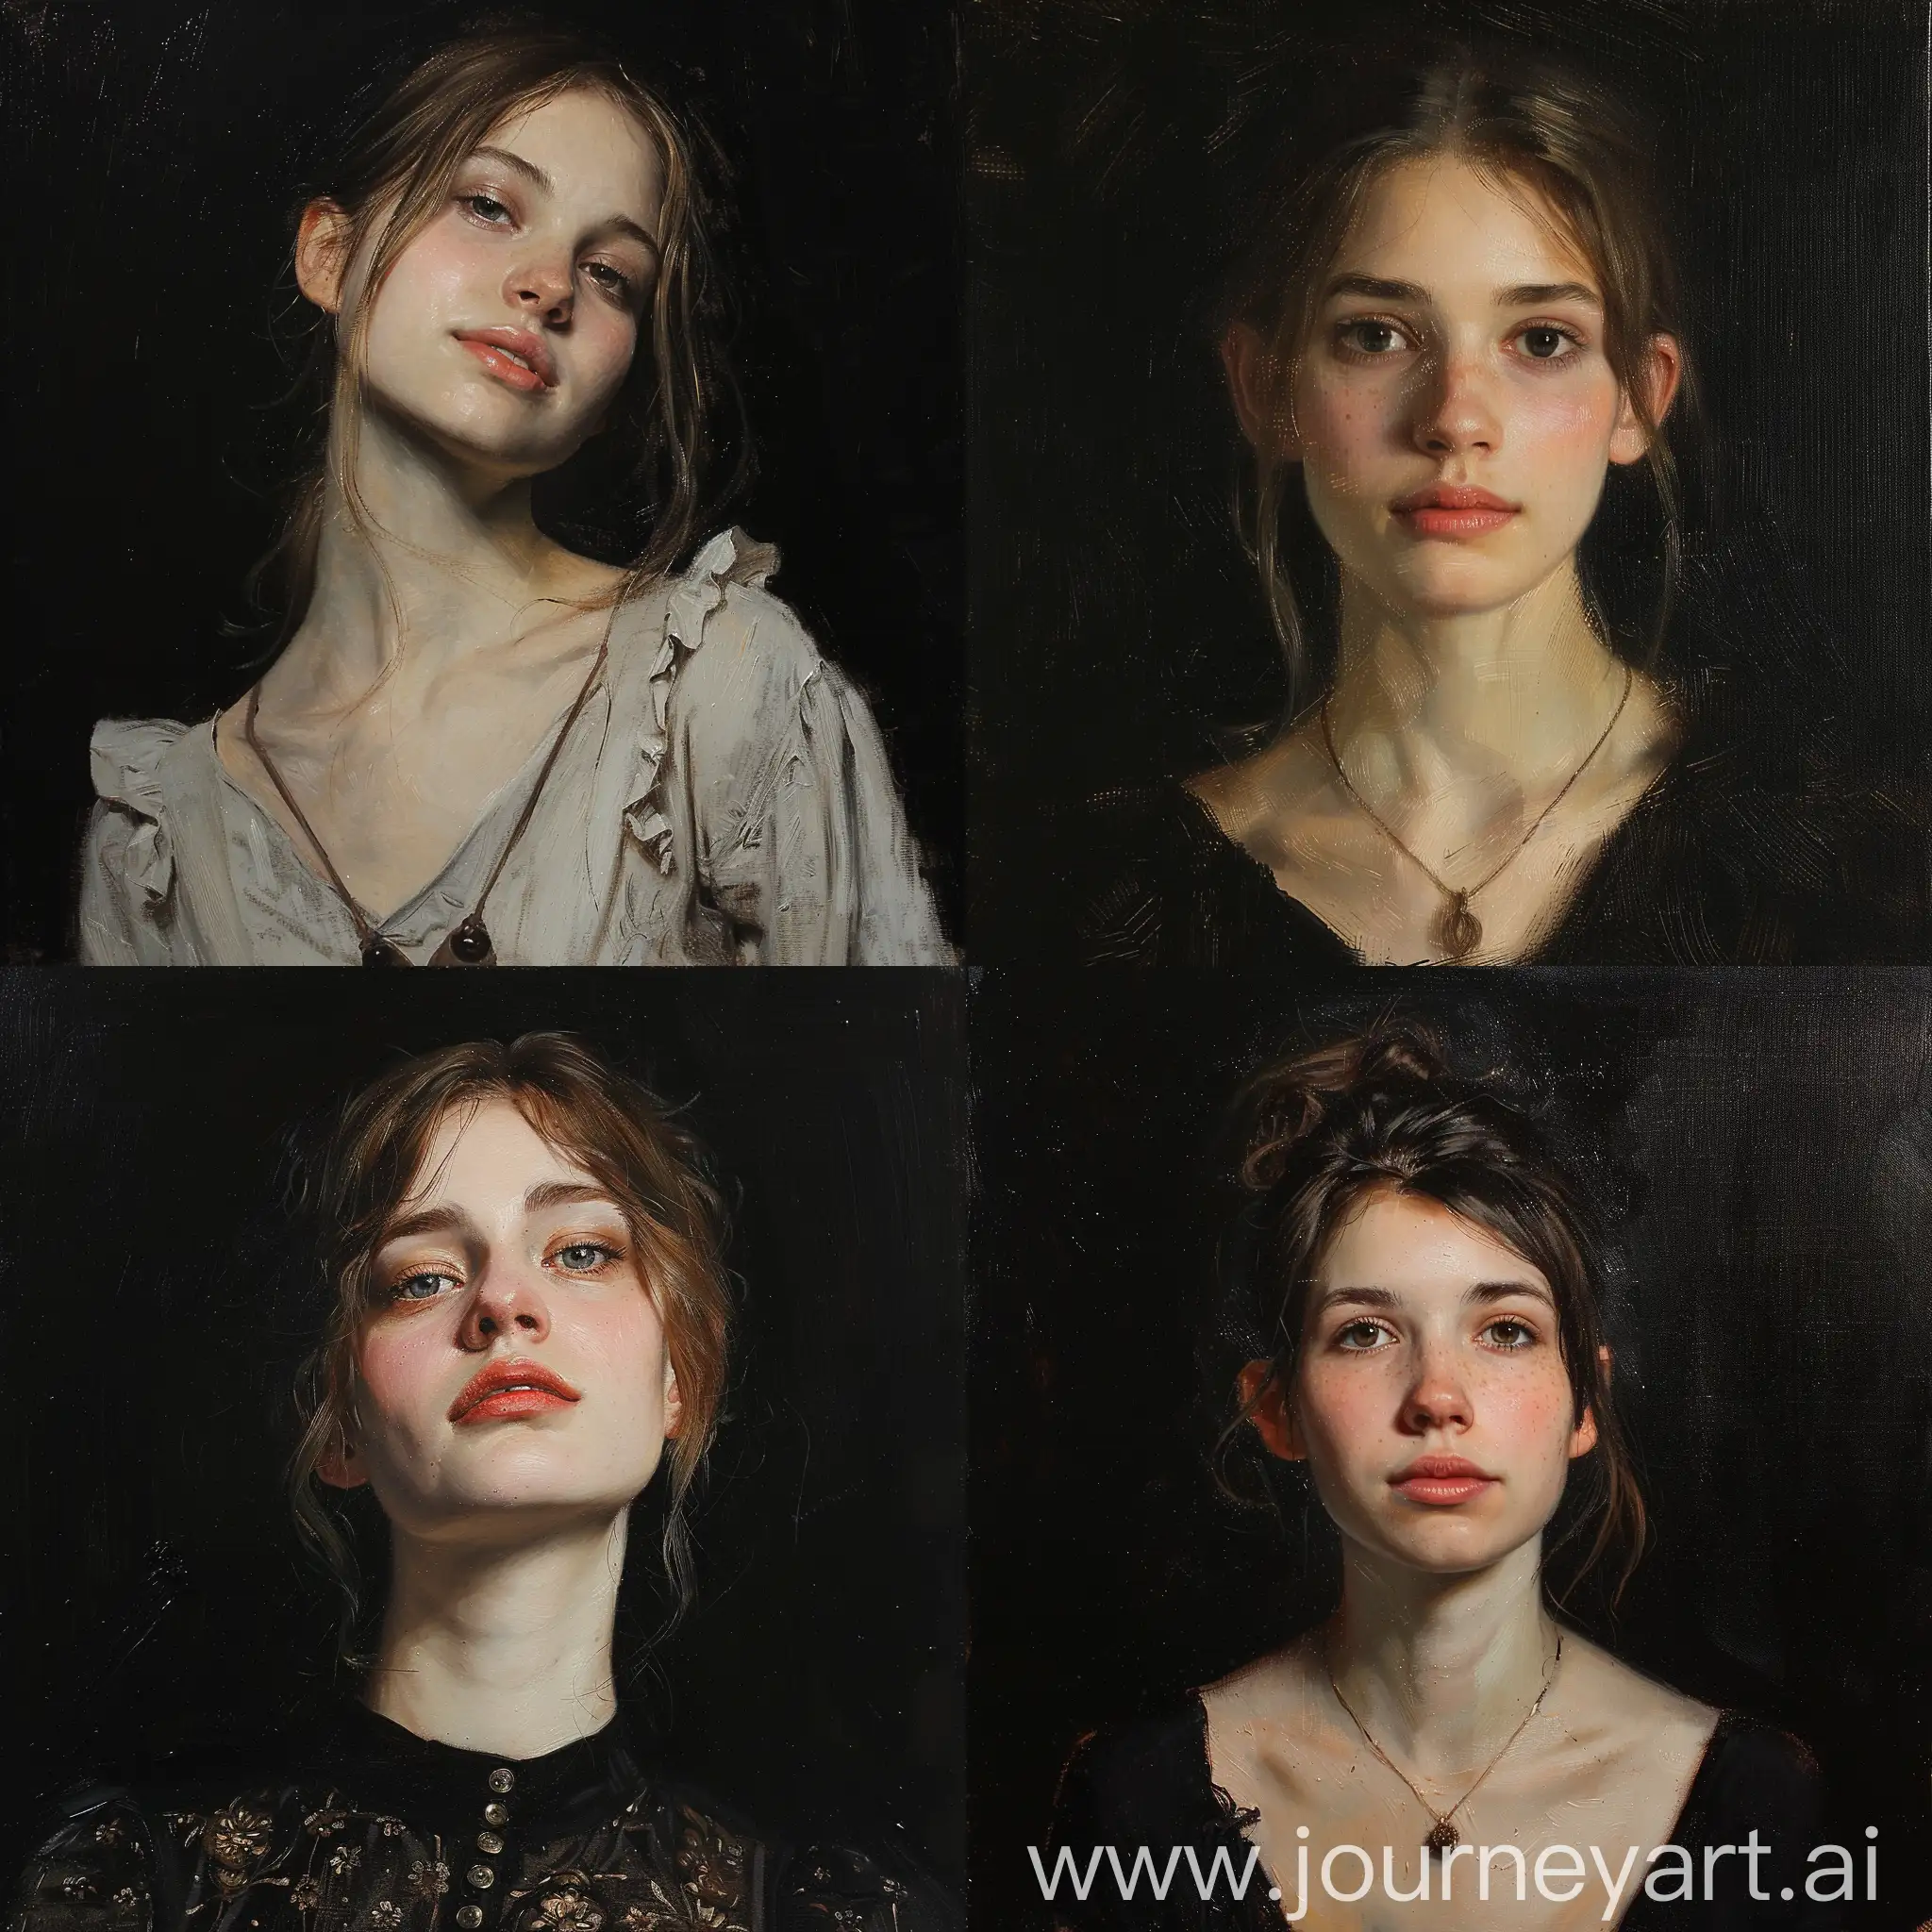 Oil sketch of a young woman , wlop John singer Sargent, jeremy lipkin and rob rey, range murata jeremy lipking, John singer Sargent, black background, jeremy lipkin, lensculture portrait awards, casey baugh and james jean, detailed realism in painting, award-winning portrait, amazingly detailed oil painting